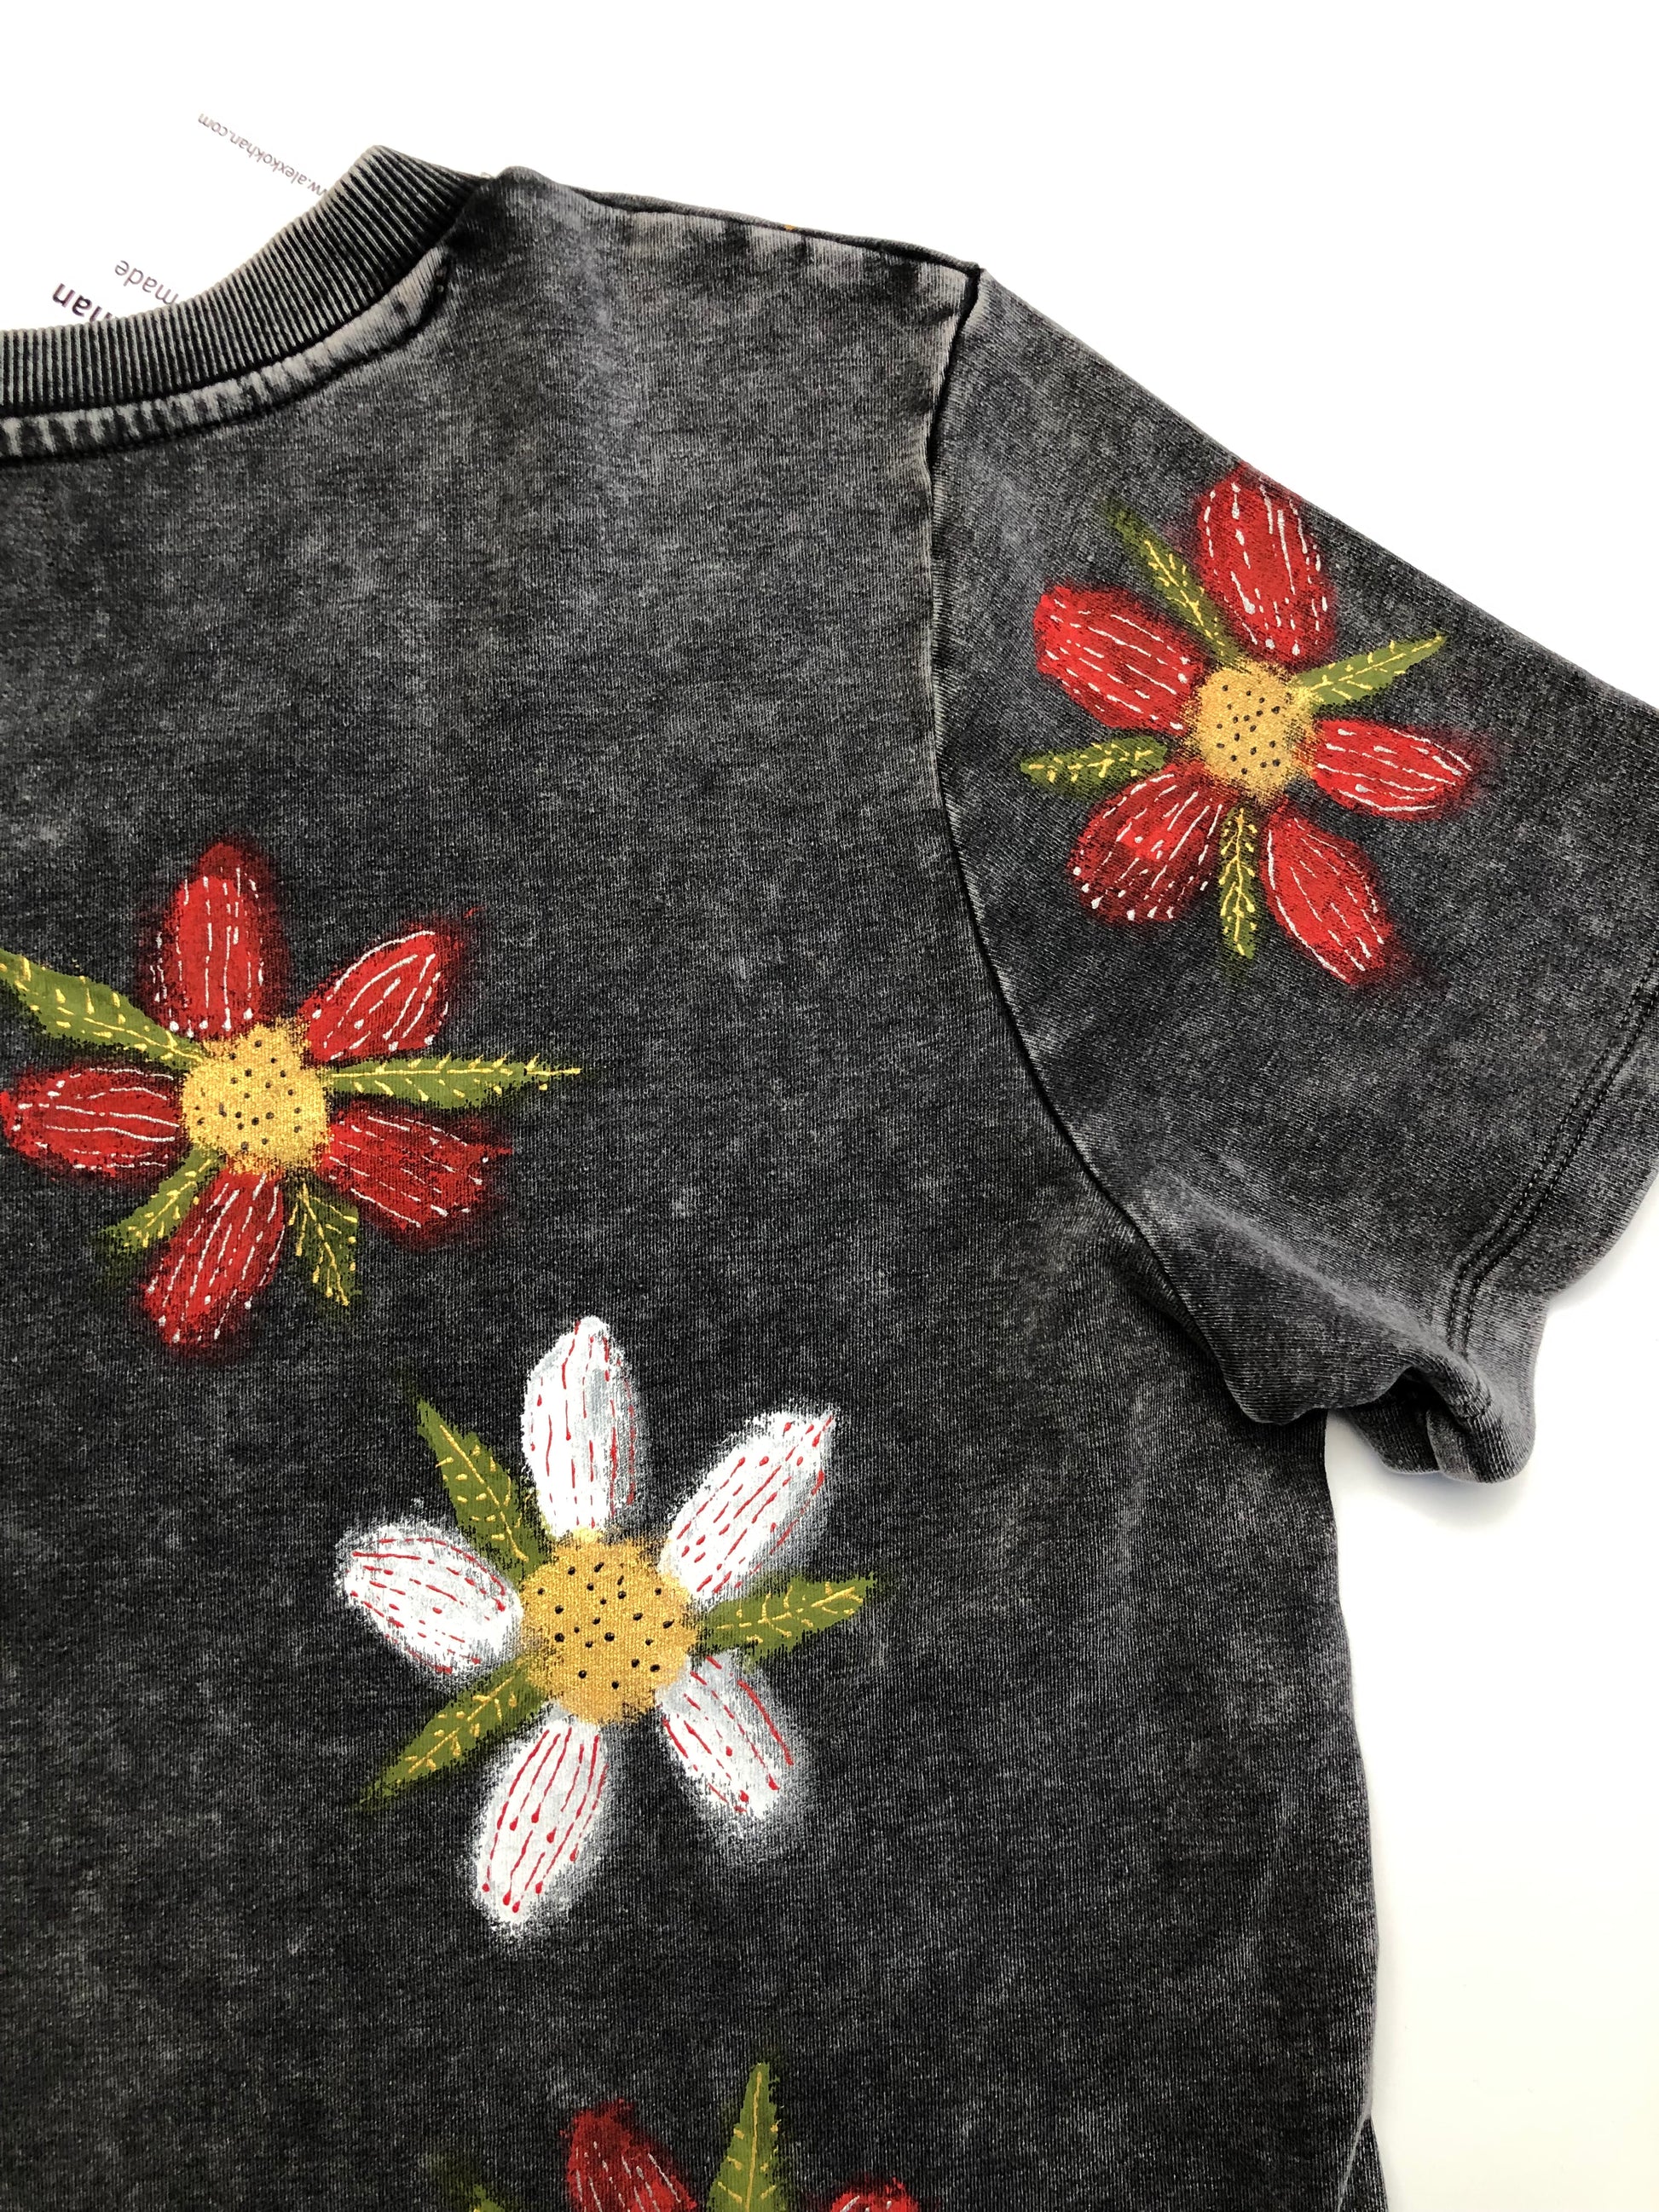 Design of painting with flowers of the back of the T -shirt on the sleeve